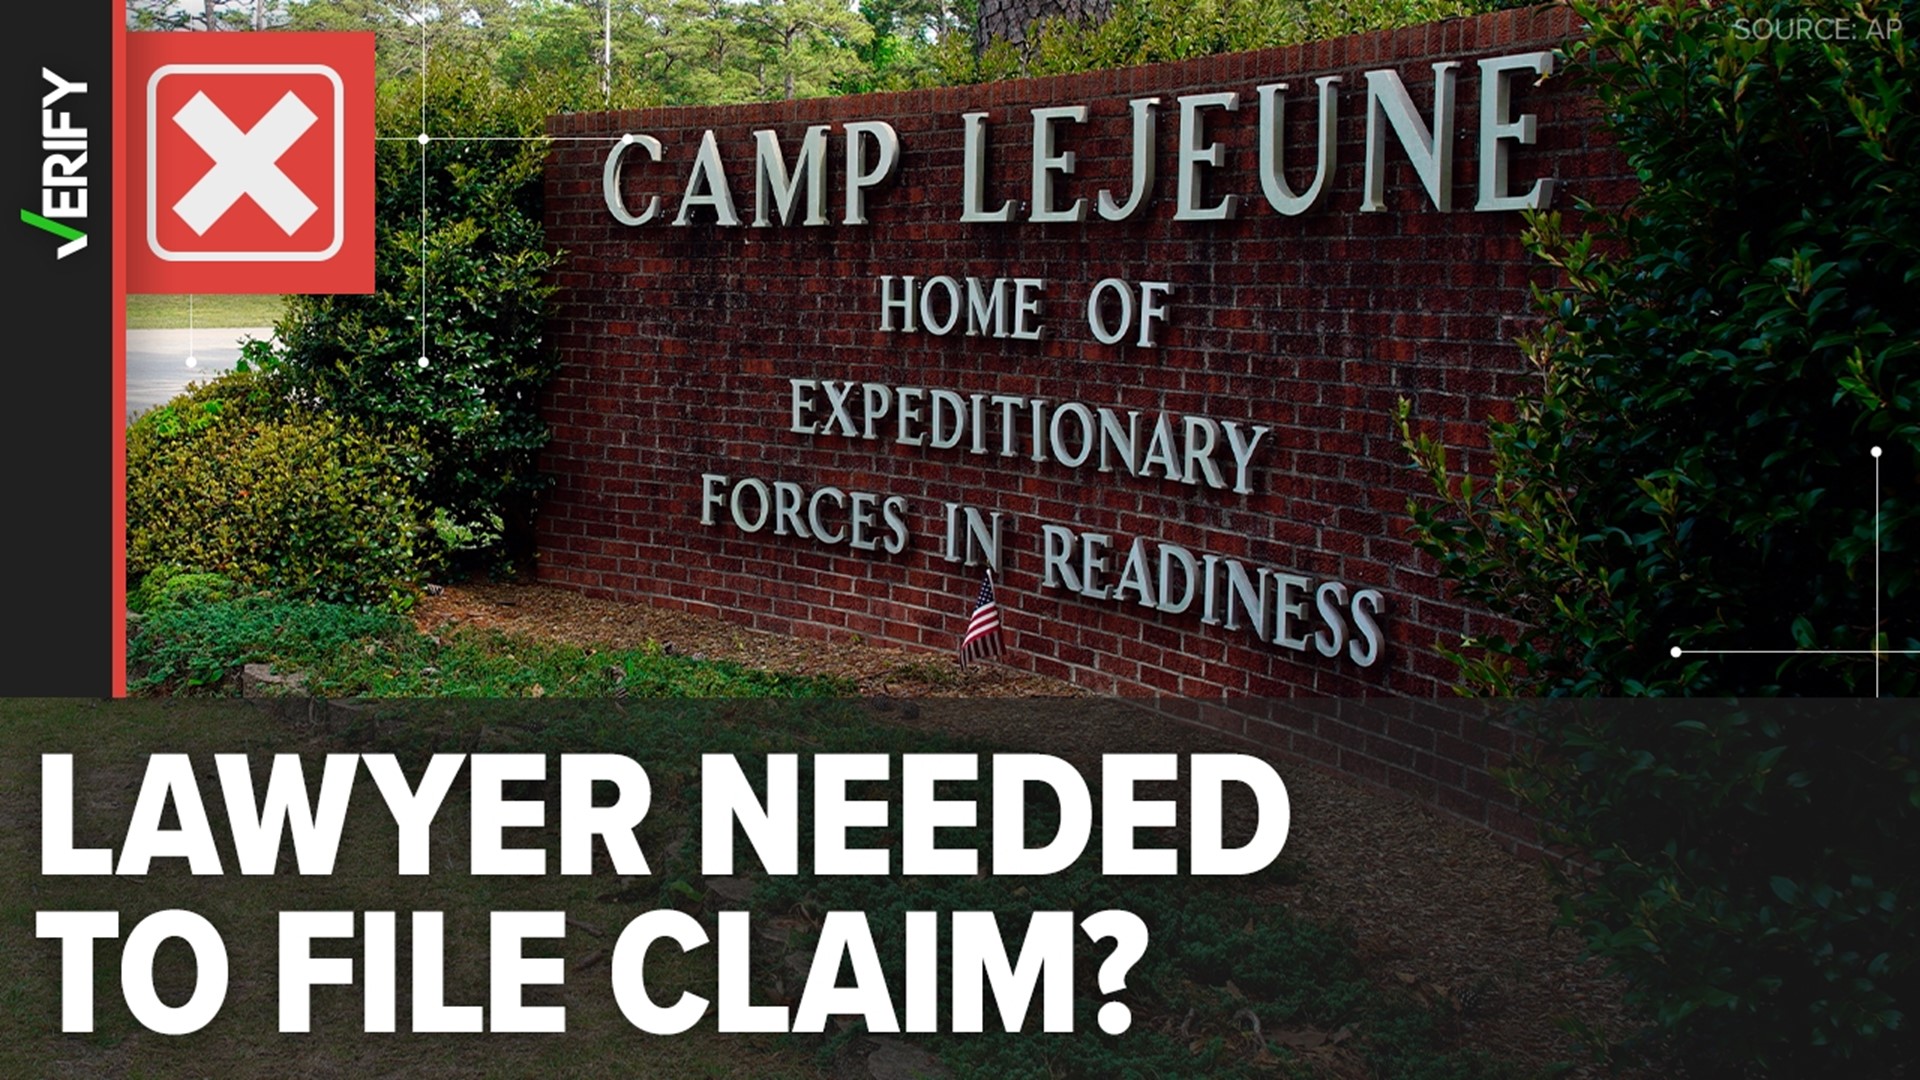 The PACT Act allows people who were exposed to contaminated drinking water at Camp Lejeune from 1953 to 1987 to seek financial compensation. Here’s how.